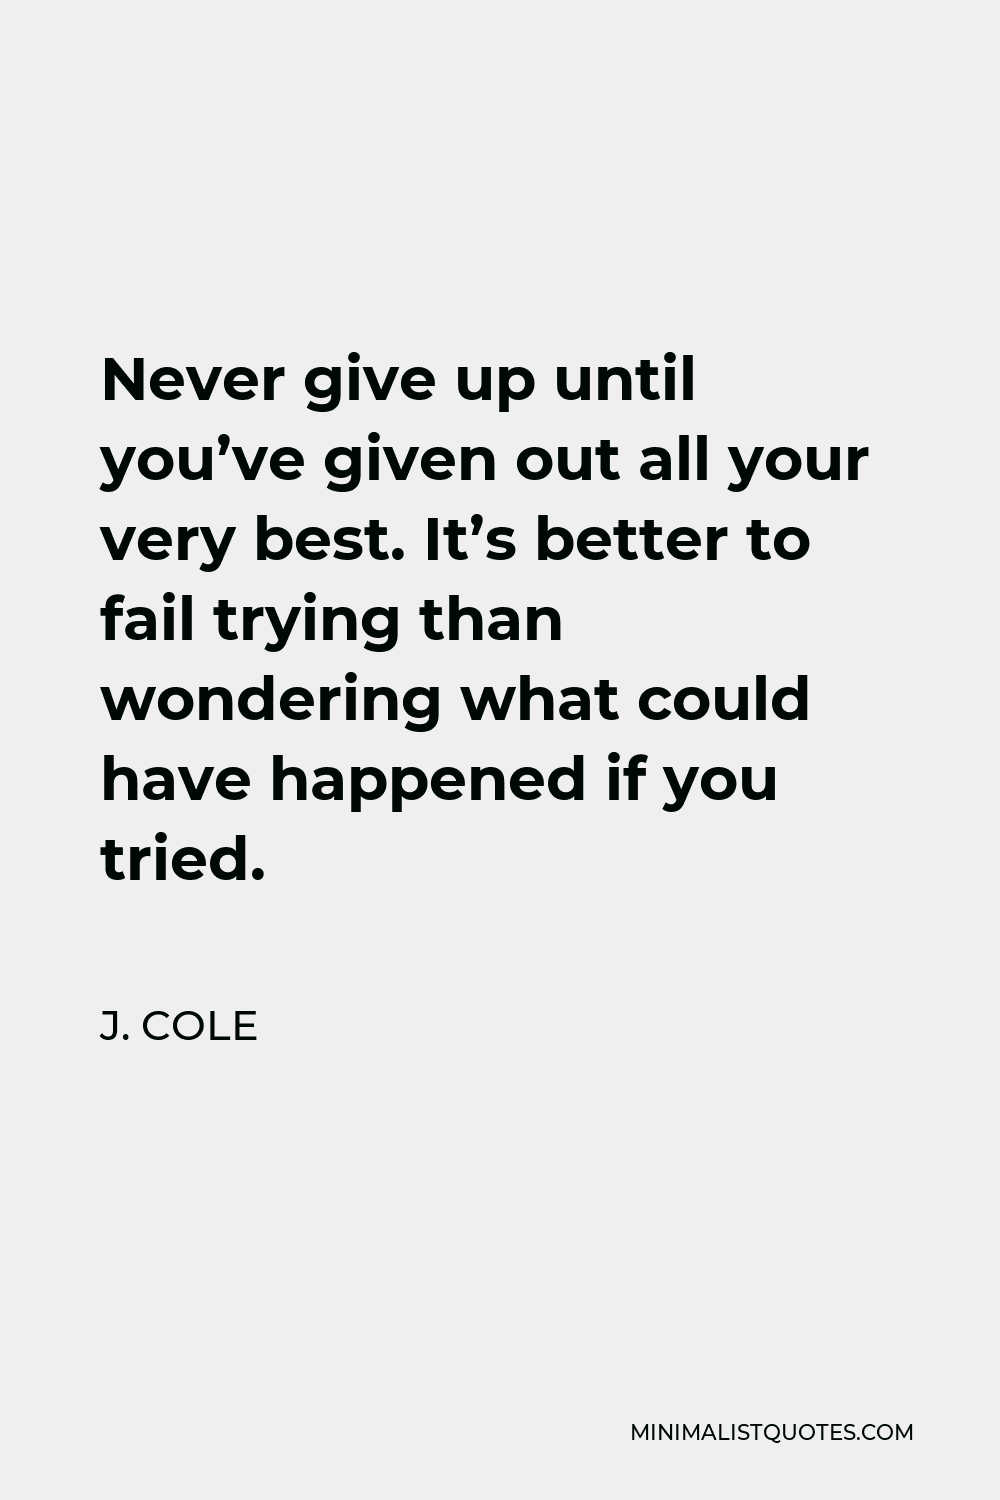 J. Cole Quote - Never give up until you’ve given out all your very best. It’s better to fail trying than wondering what could have happened if you tried.